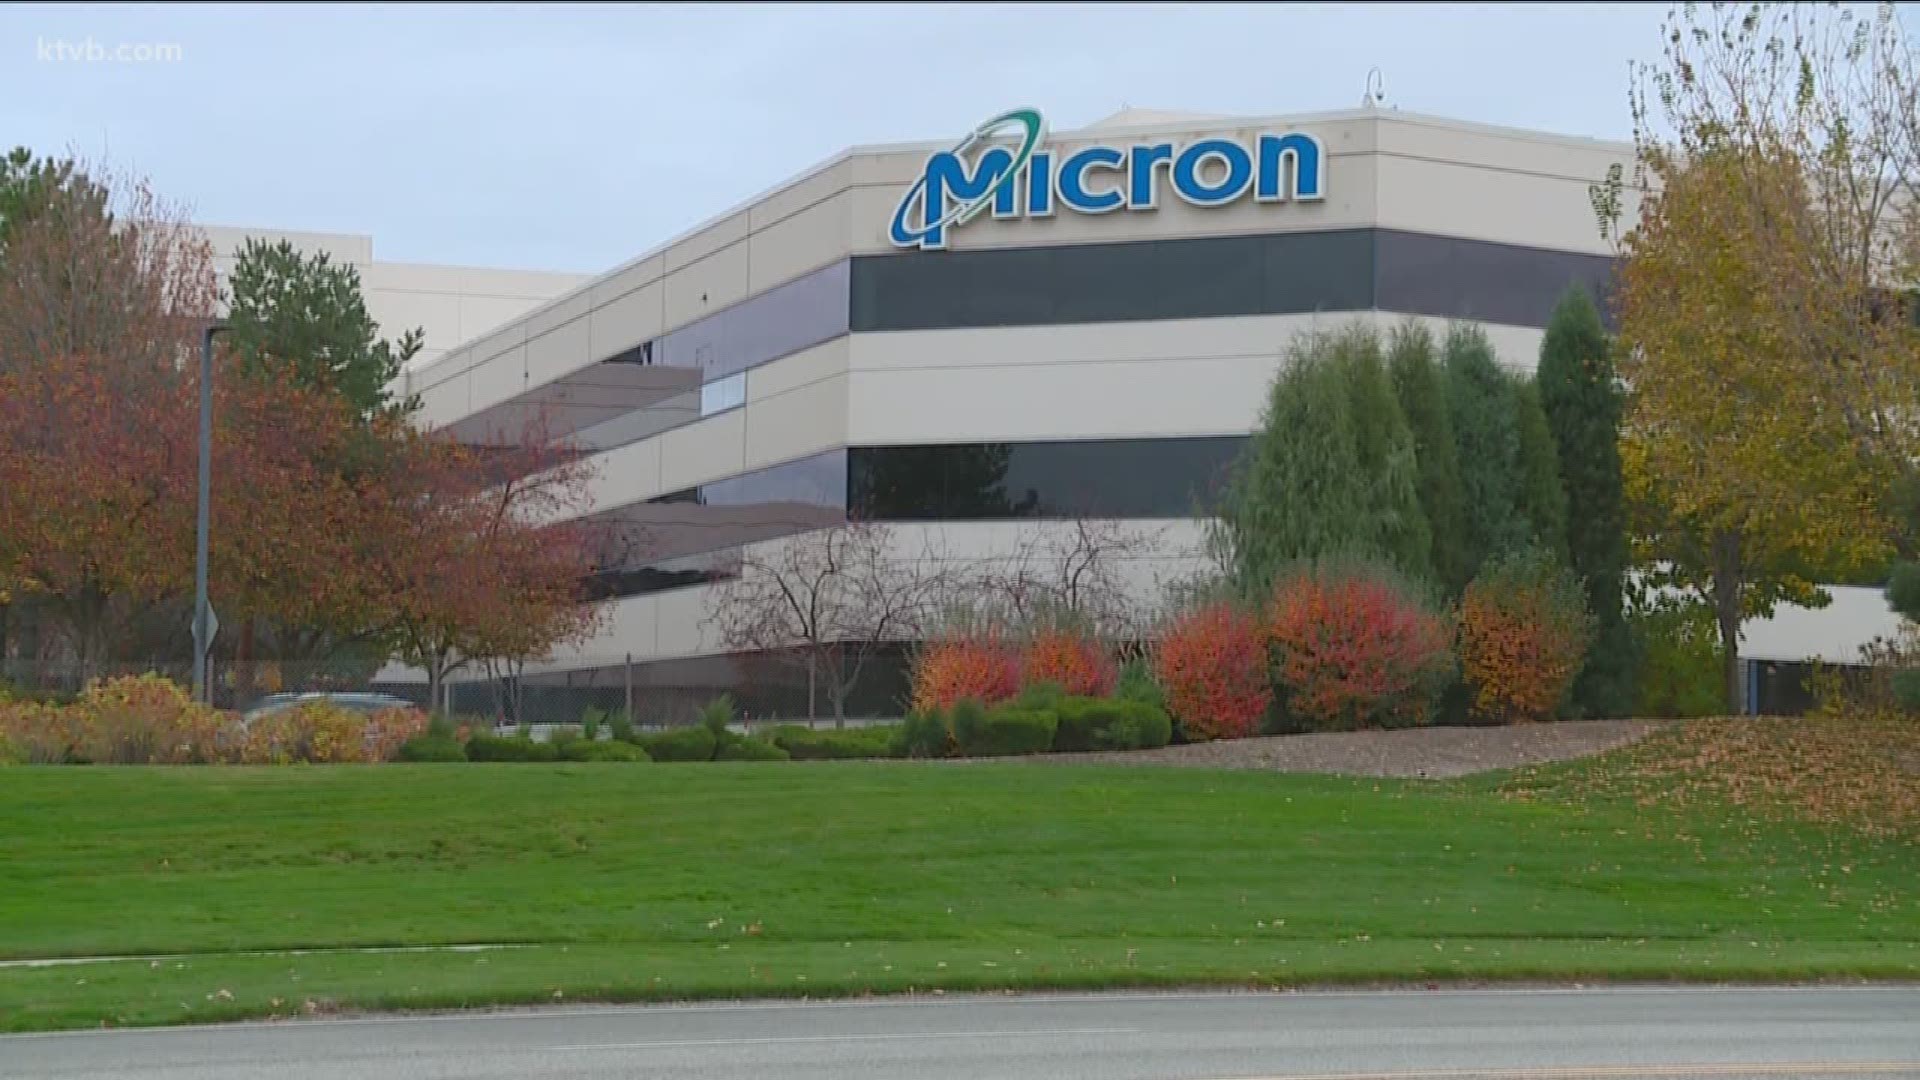 The theft of trade secrets from Micron was worth $9 billion, according to the feds.